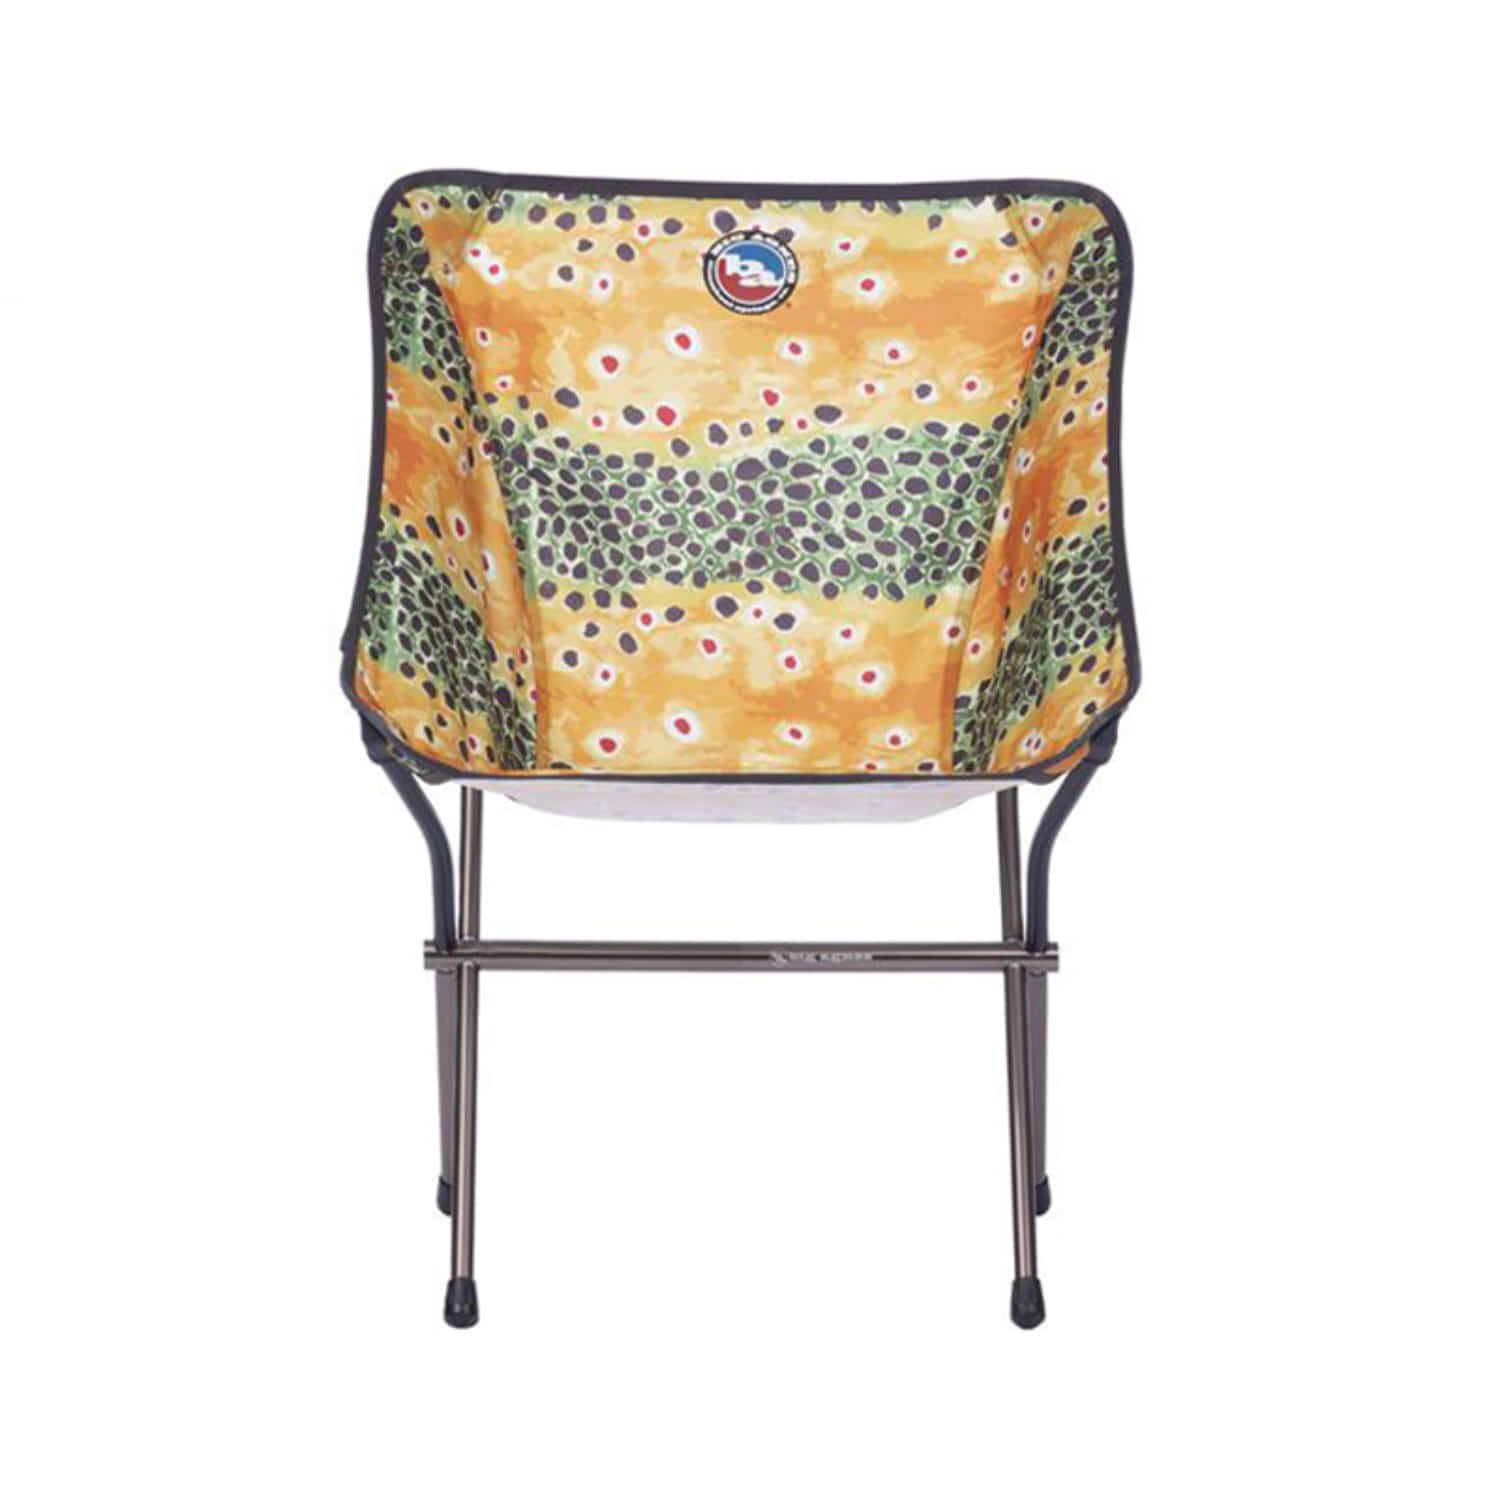 Mica Basin Camp Chair - Brown Trout